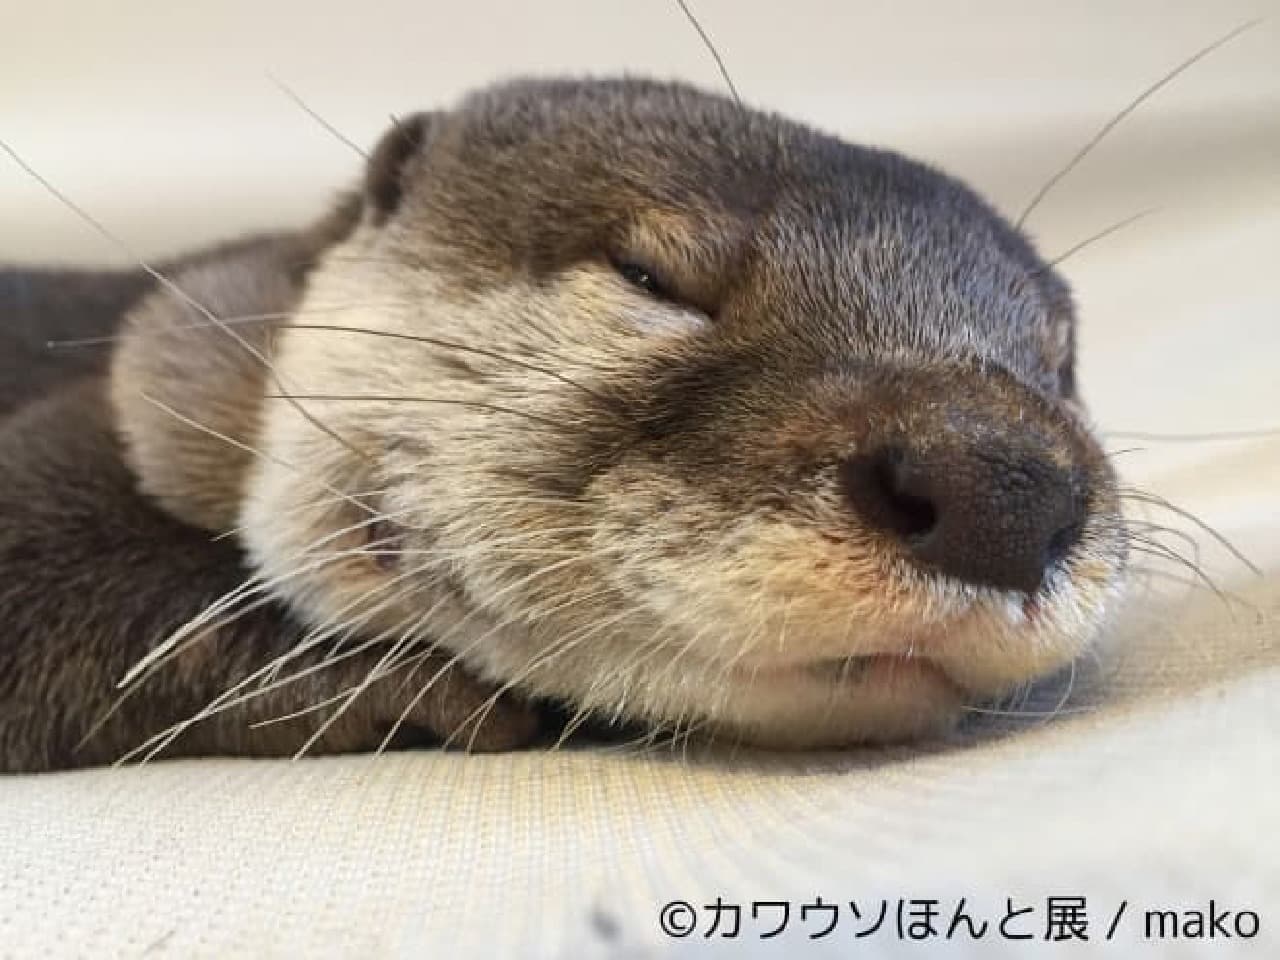 Otter Joint Photo & Product Sales Exhibition "Otter Real Exhibition"